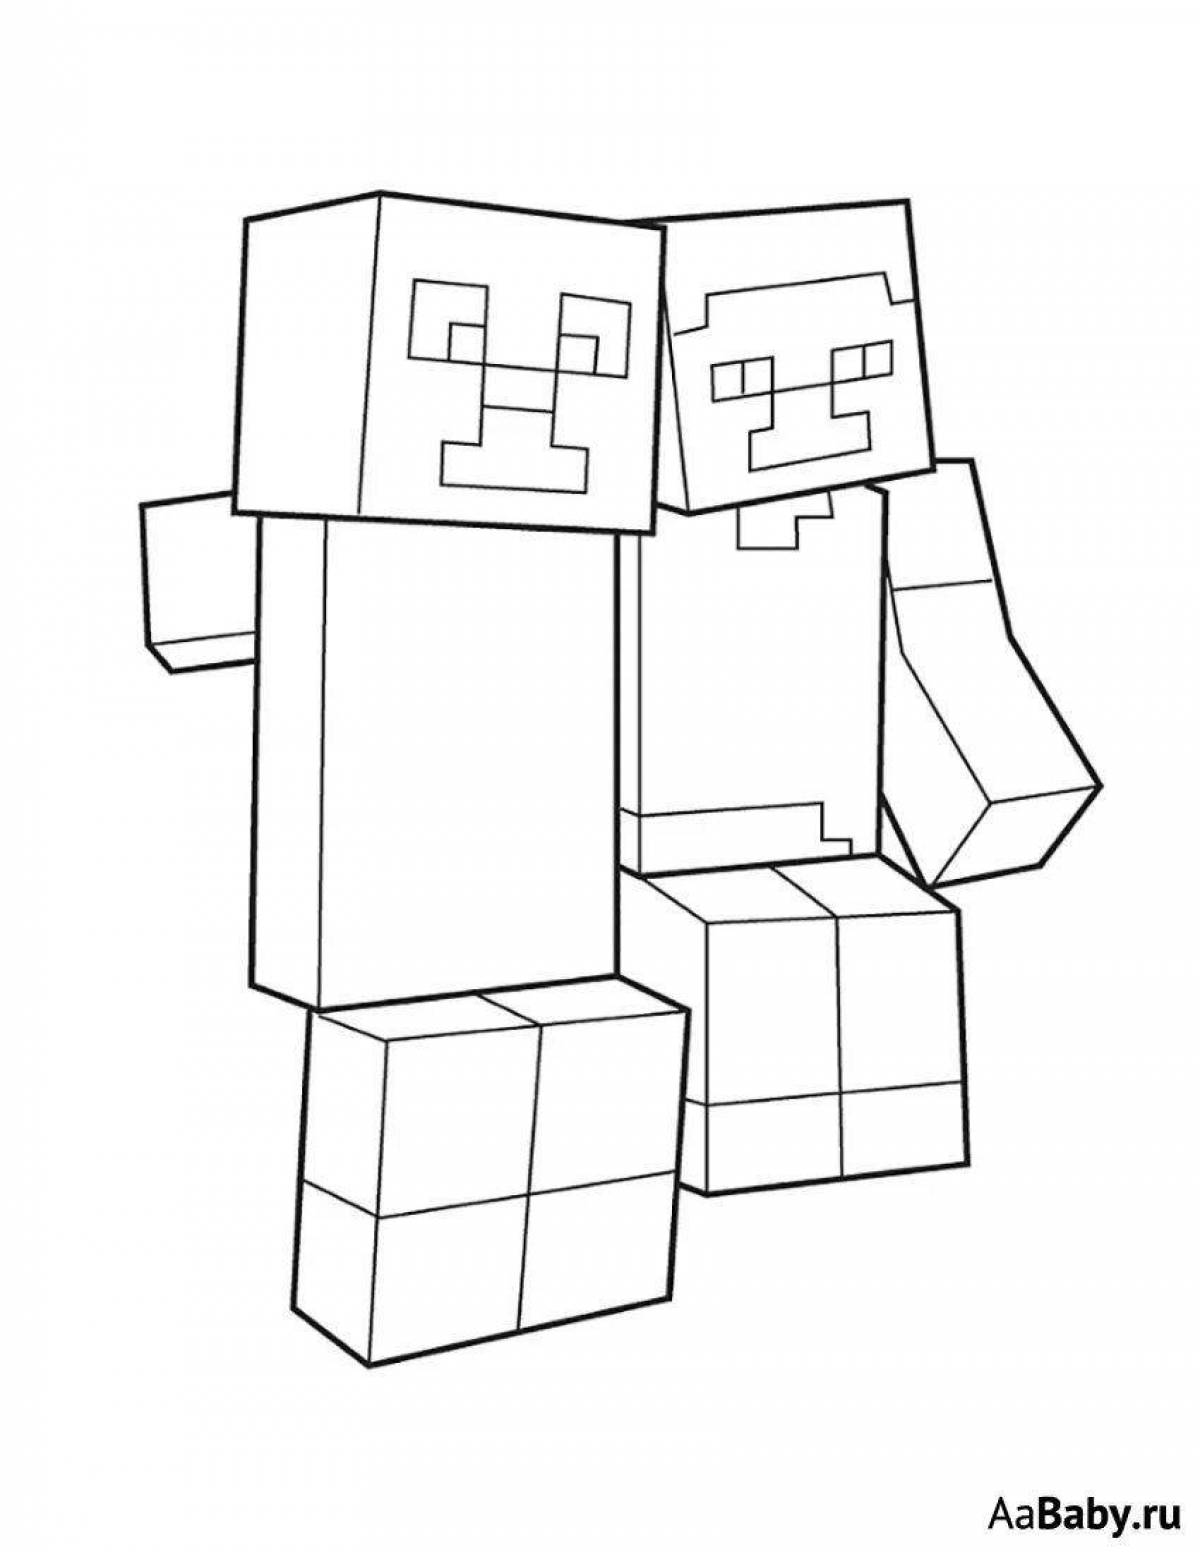 Bright alex and steve minecraft coloring